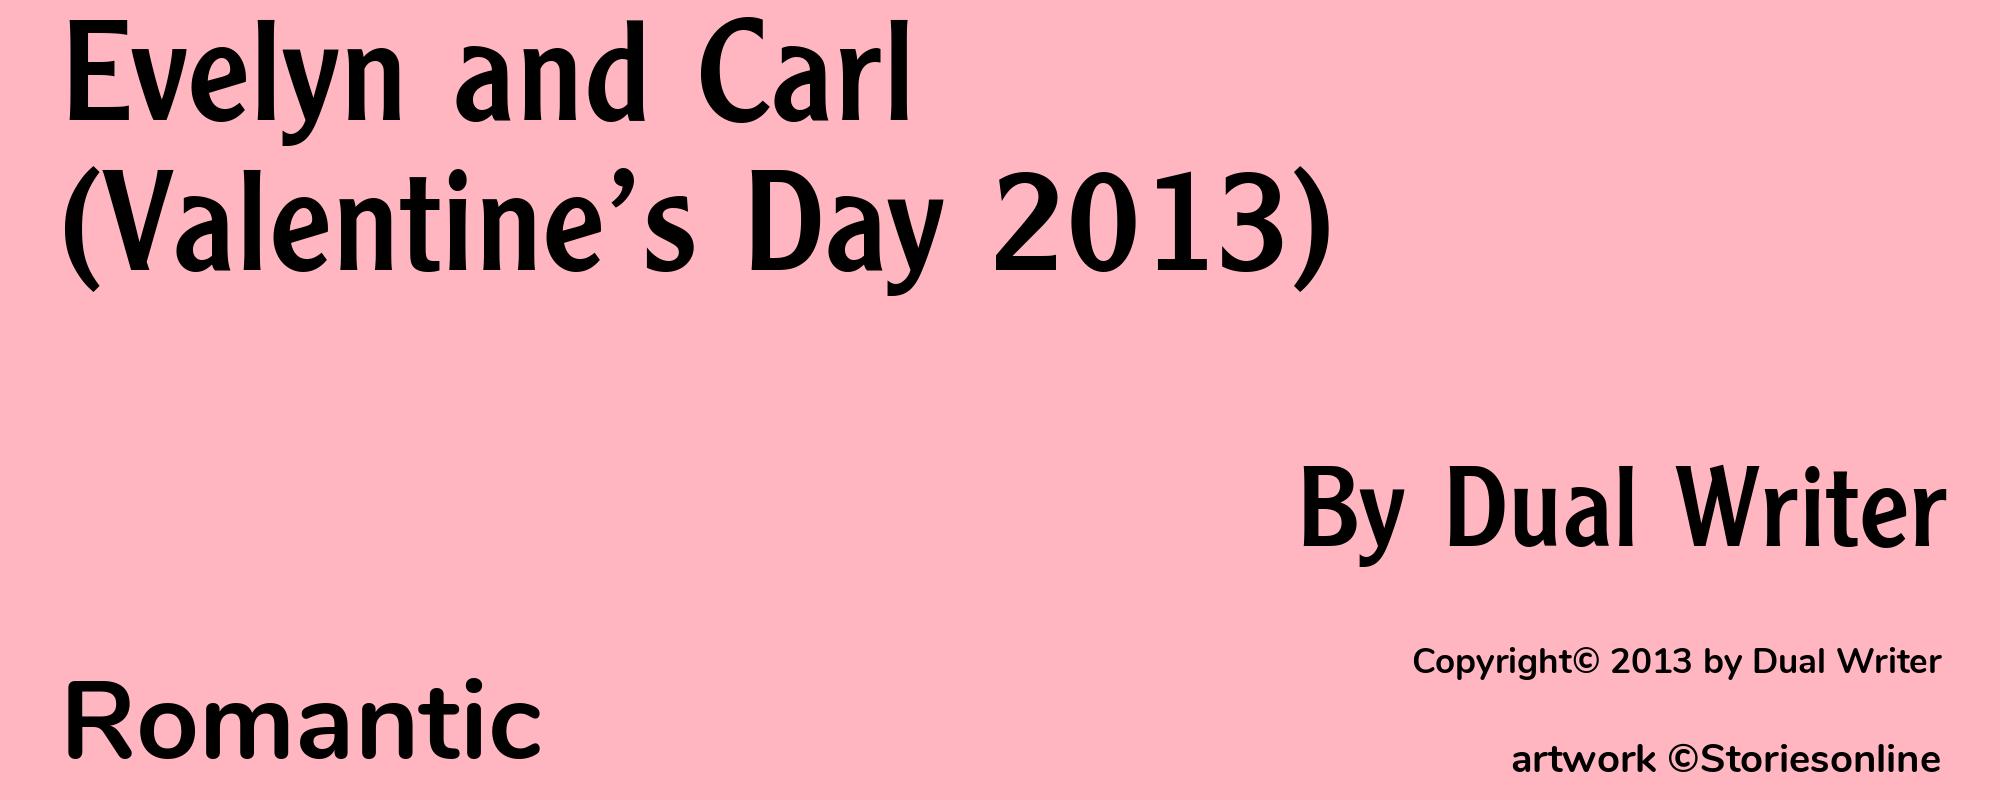 Evelyn and Carl (Valentine’s Day 2013) - Cover